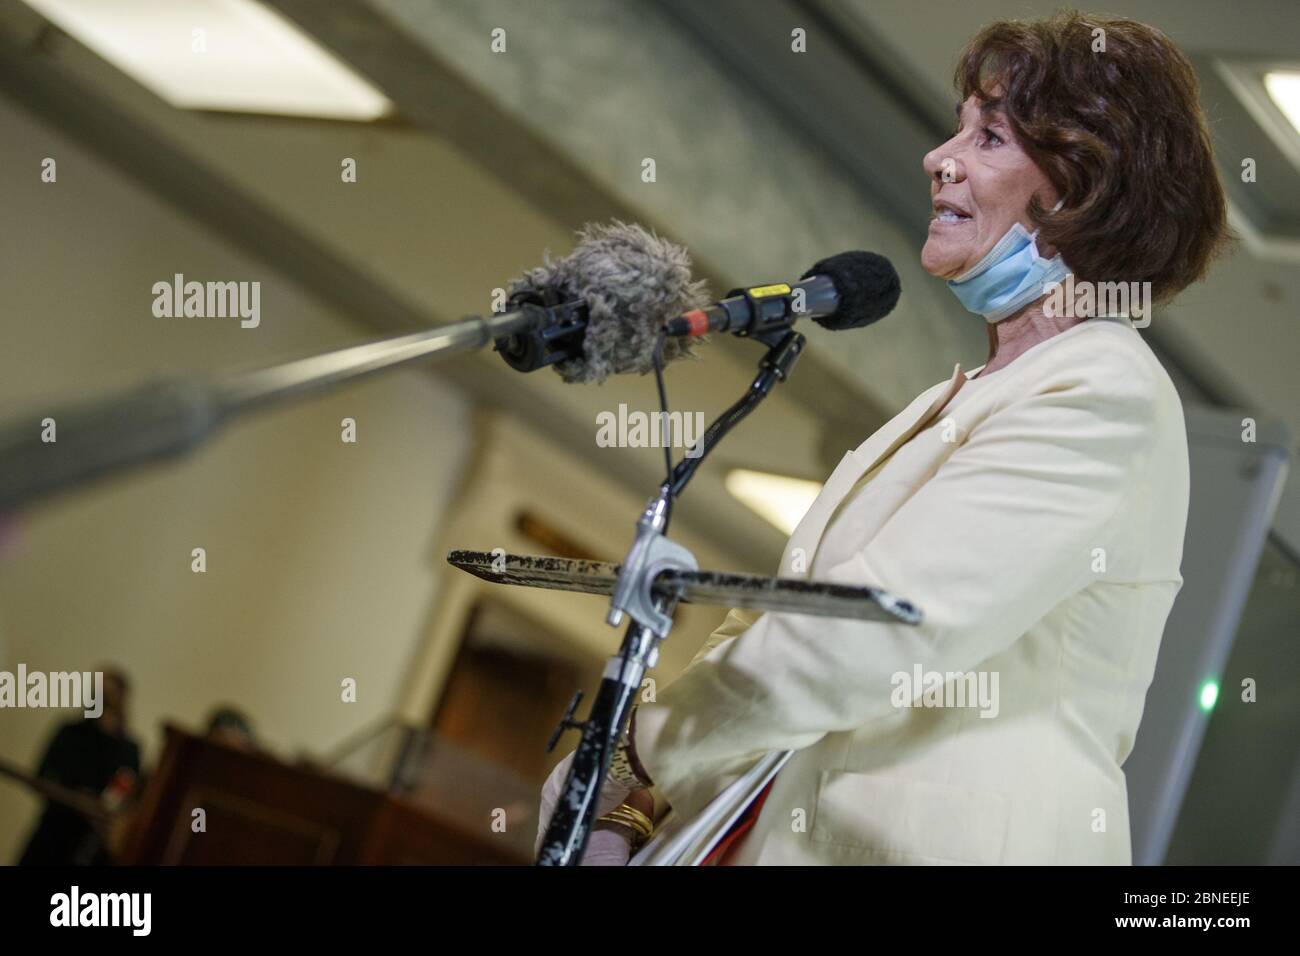 Washington, United States. 14th May, 2020. Committee Chairwoman Anna Eshoo responds to a question from the news media following the House Energy and Commerce Subcommittee on Health hearing to discuss protecting scientific integrity in response to the coronavirus outbreak on Capitol Hill in Washington, DC on Thursday, May 14, 2020. Pool Photo by Shawn Thew/UPI Credit: UPI/Alamy Live News Stock Photo